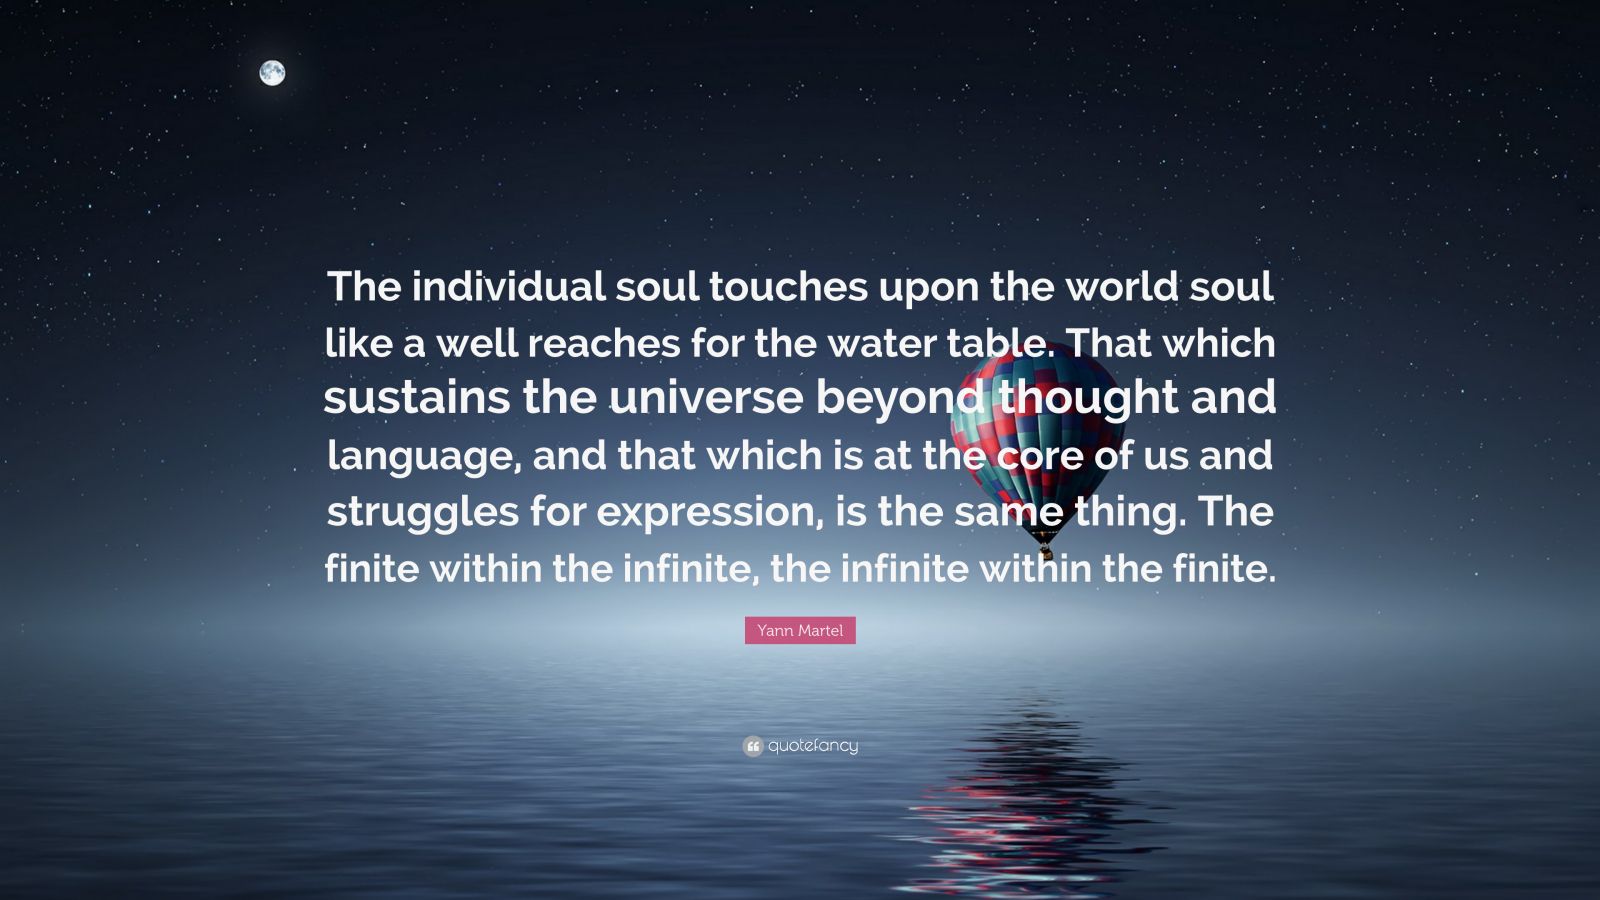 Yann Martel Quote: “The individual soul touches upon the world soul ...